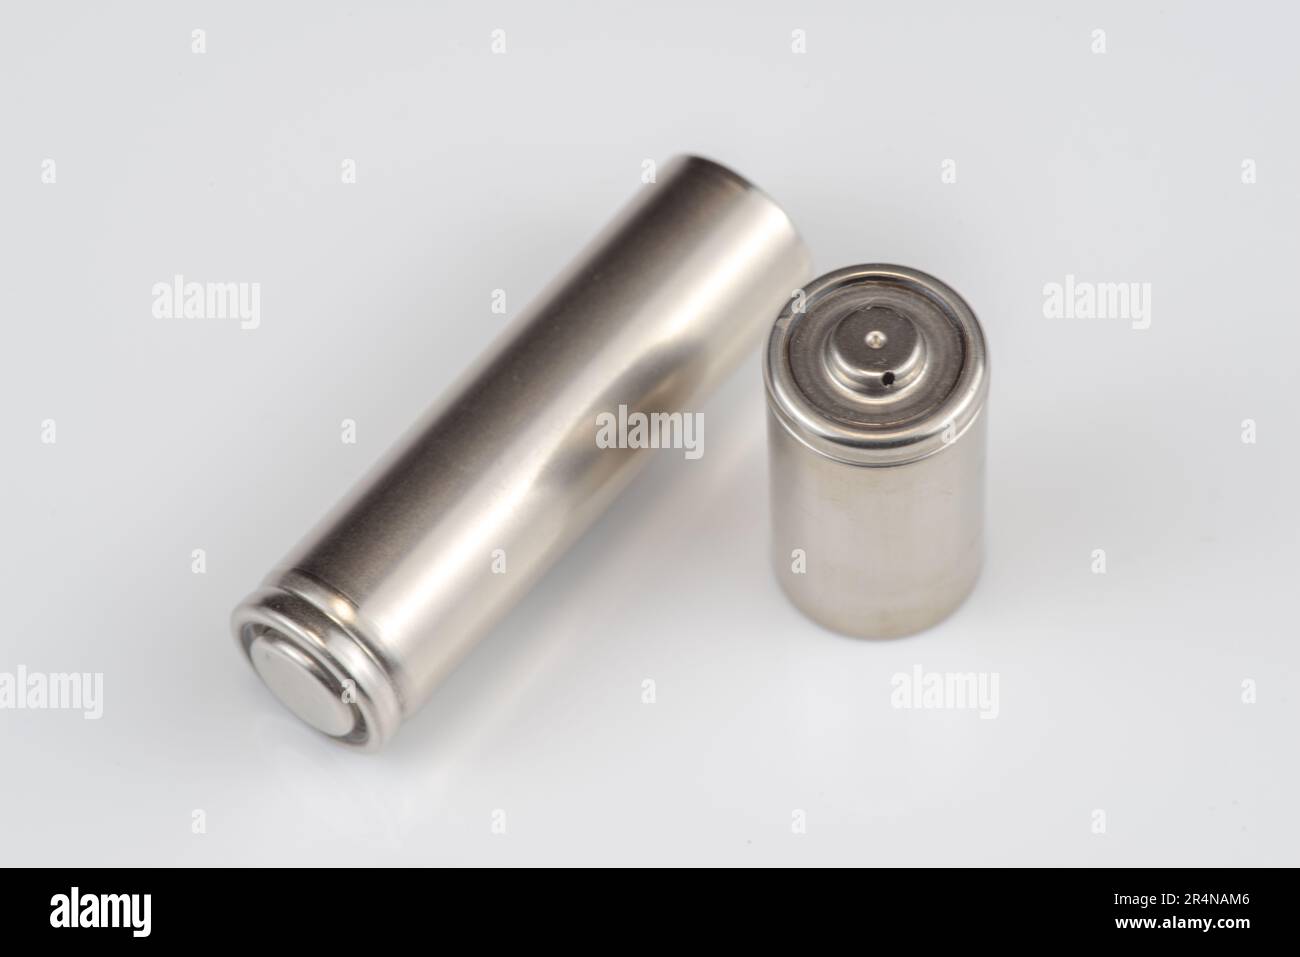 Alkaline batteries lie on white background, The concept of vital energy reserve Stock Photo